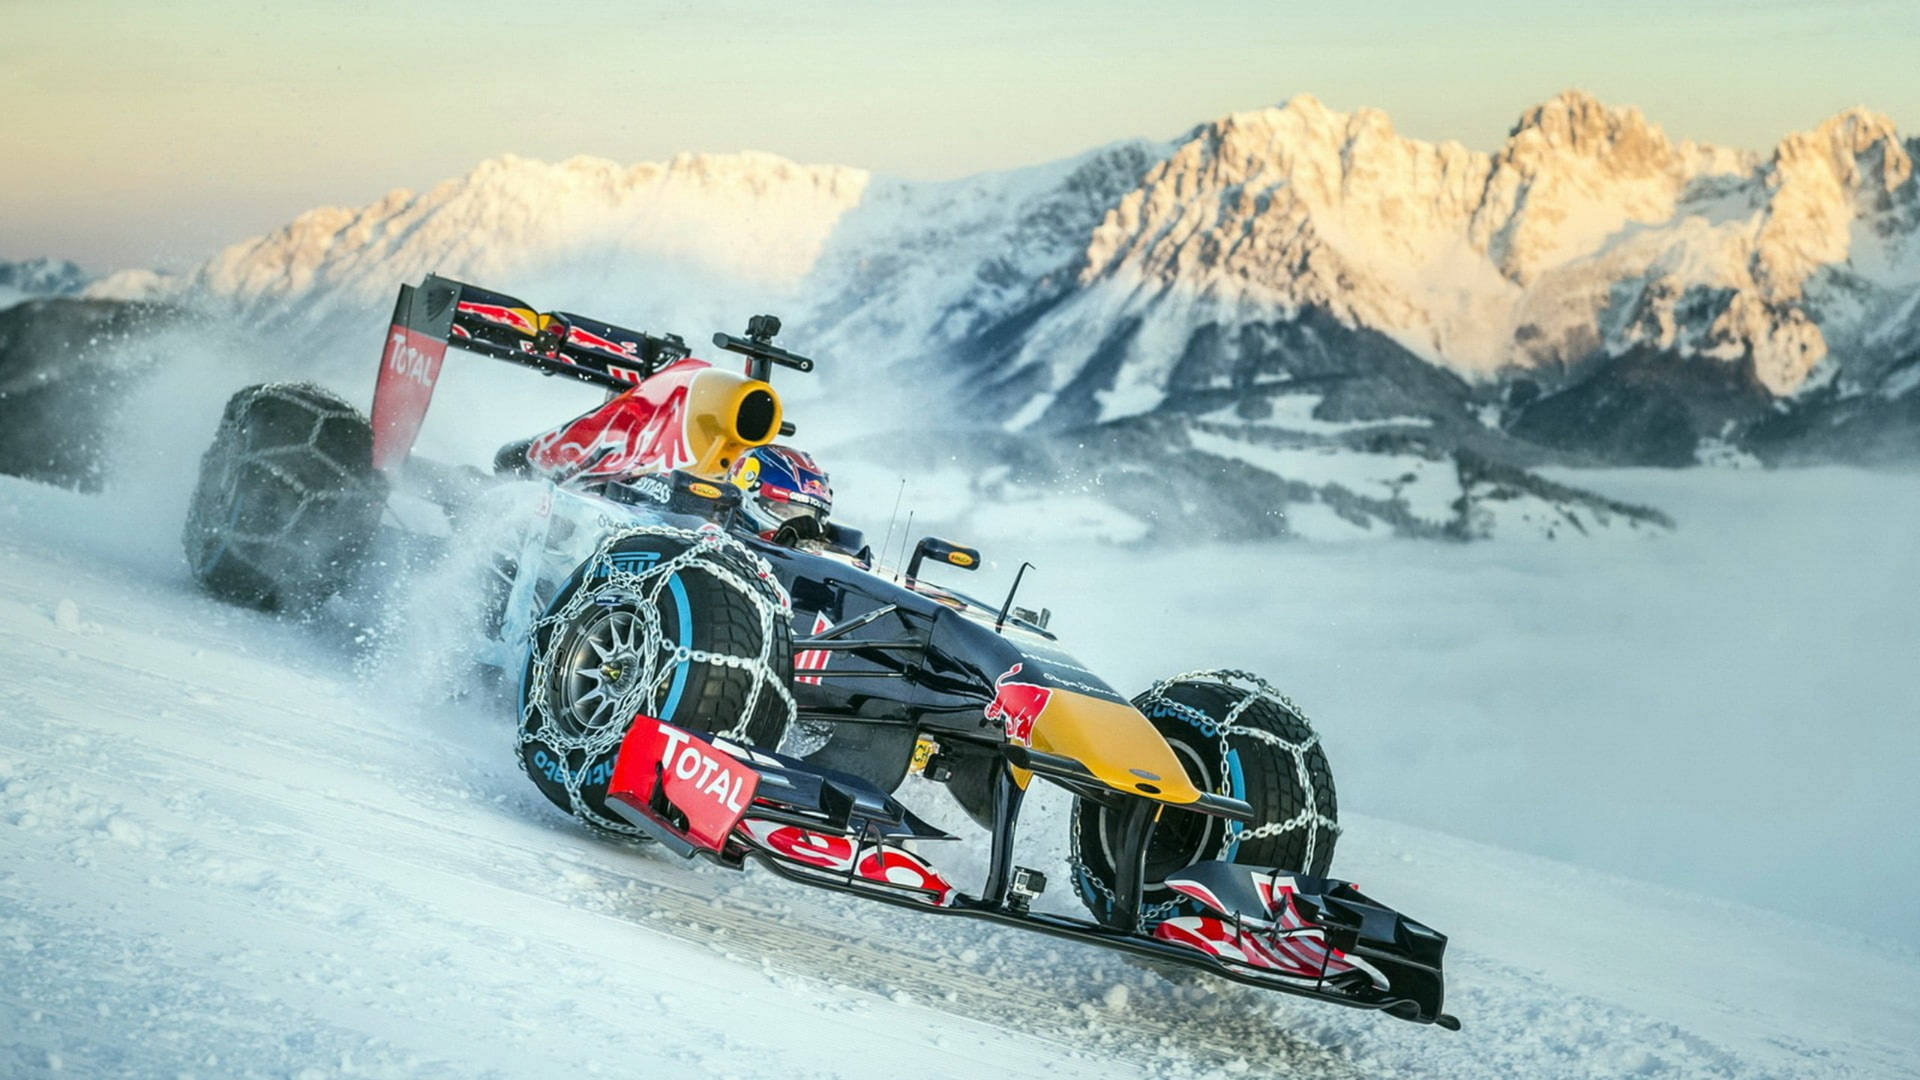 F1 Racing Car In Snow Road Background